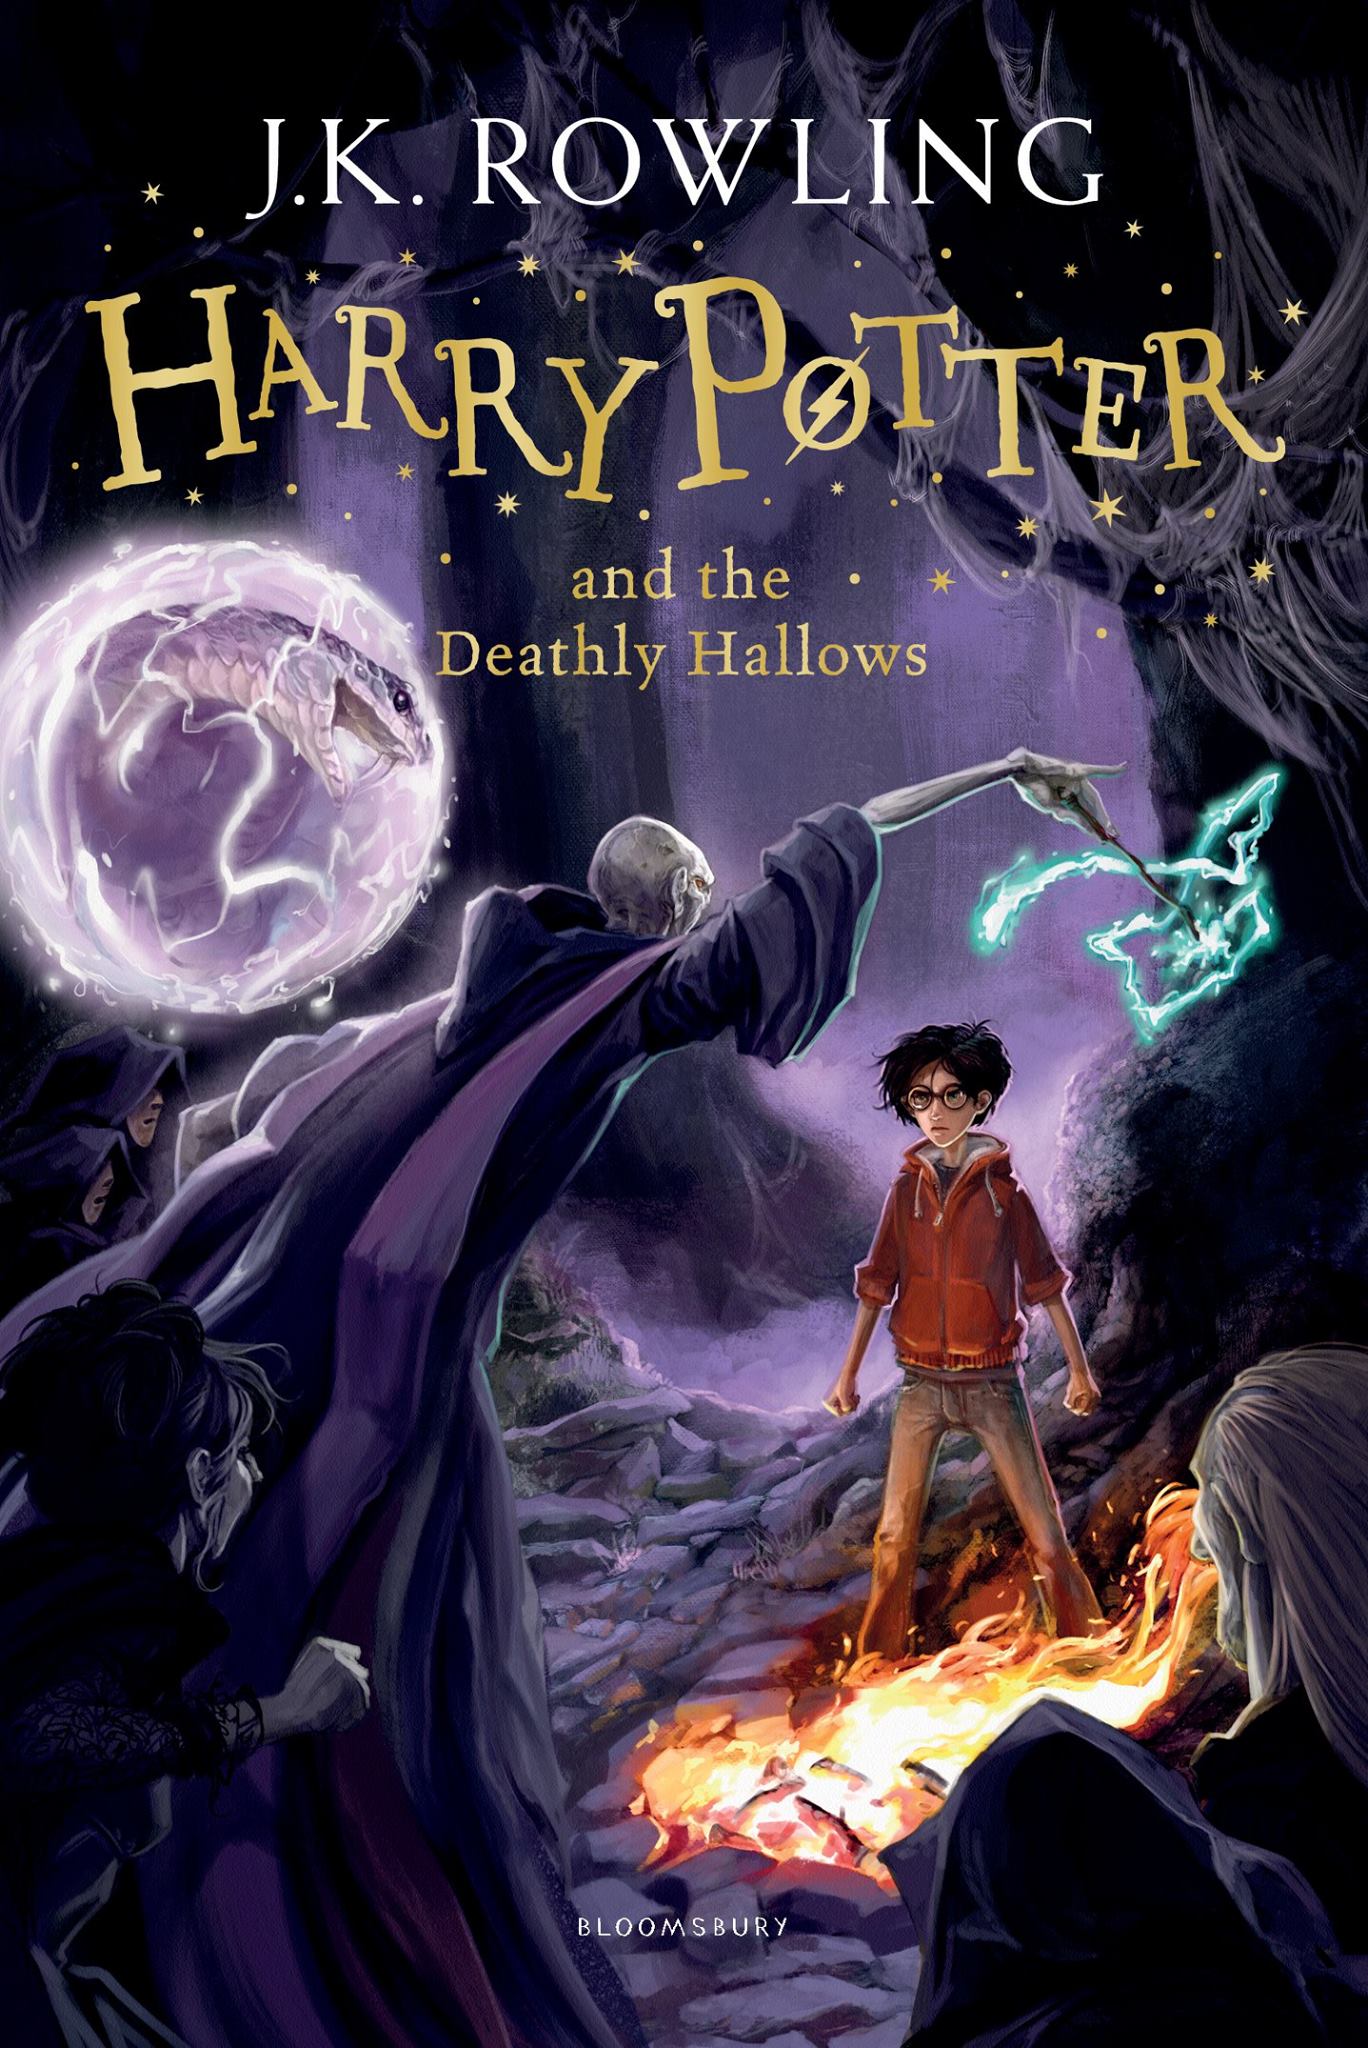 Harry Potter and the Deathly Hallows | Harry Potter Wiki | Fandom